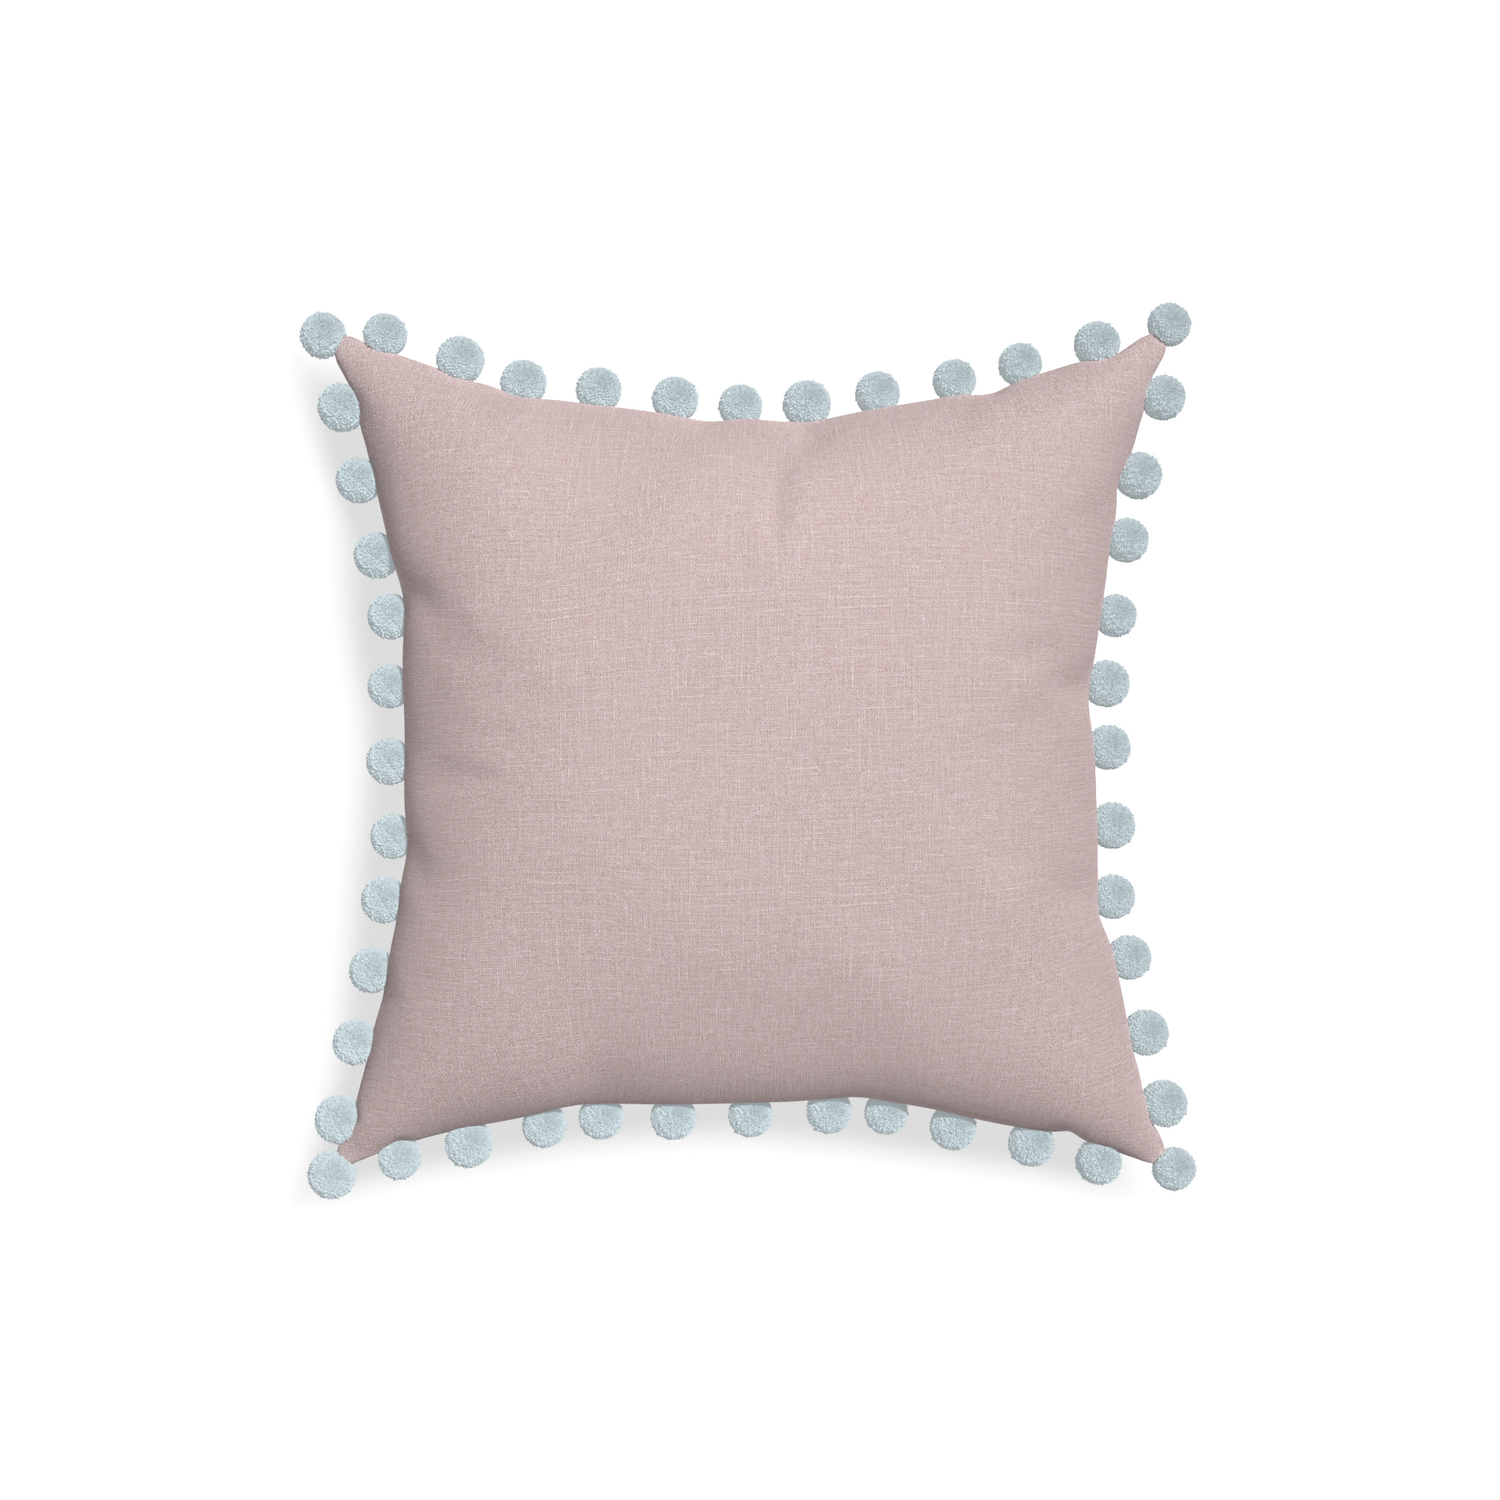 18-square orchid custom mauve pinkpillow with powder pom pom on white background